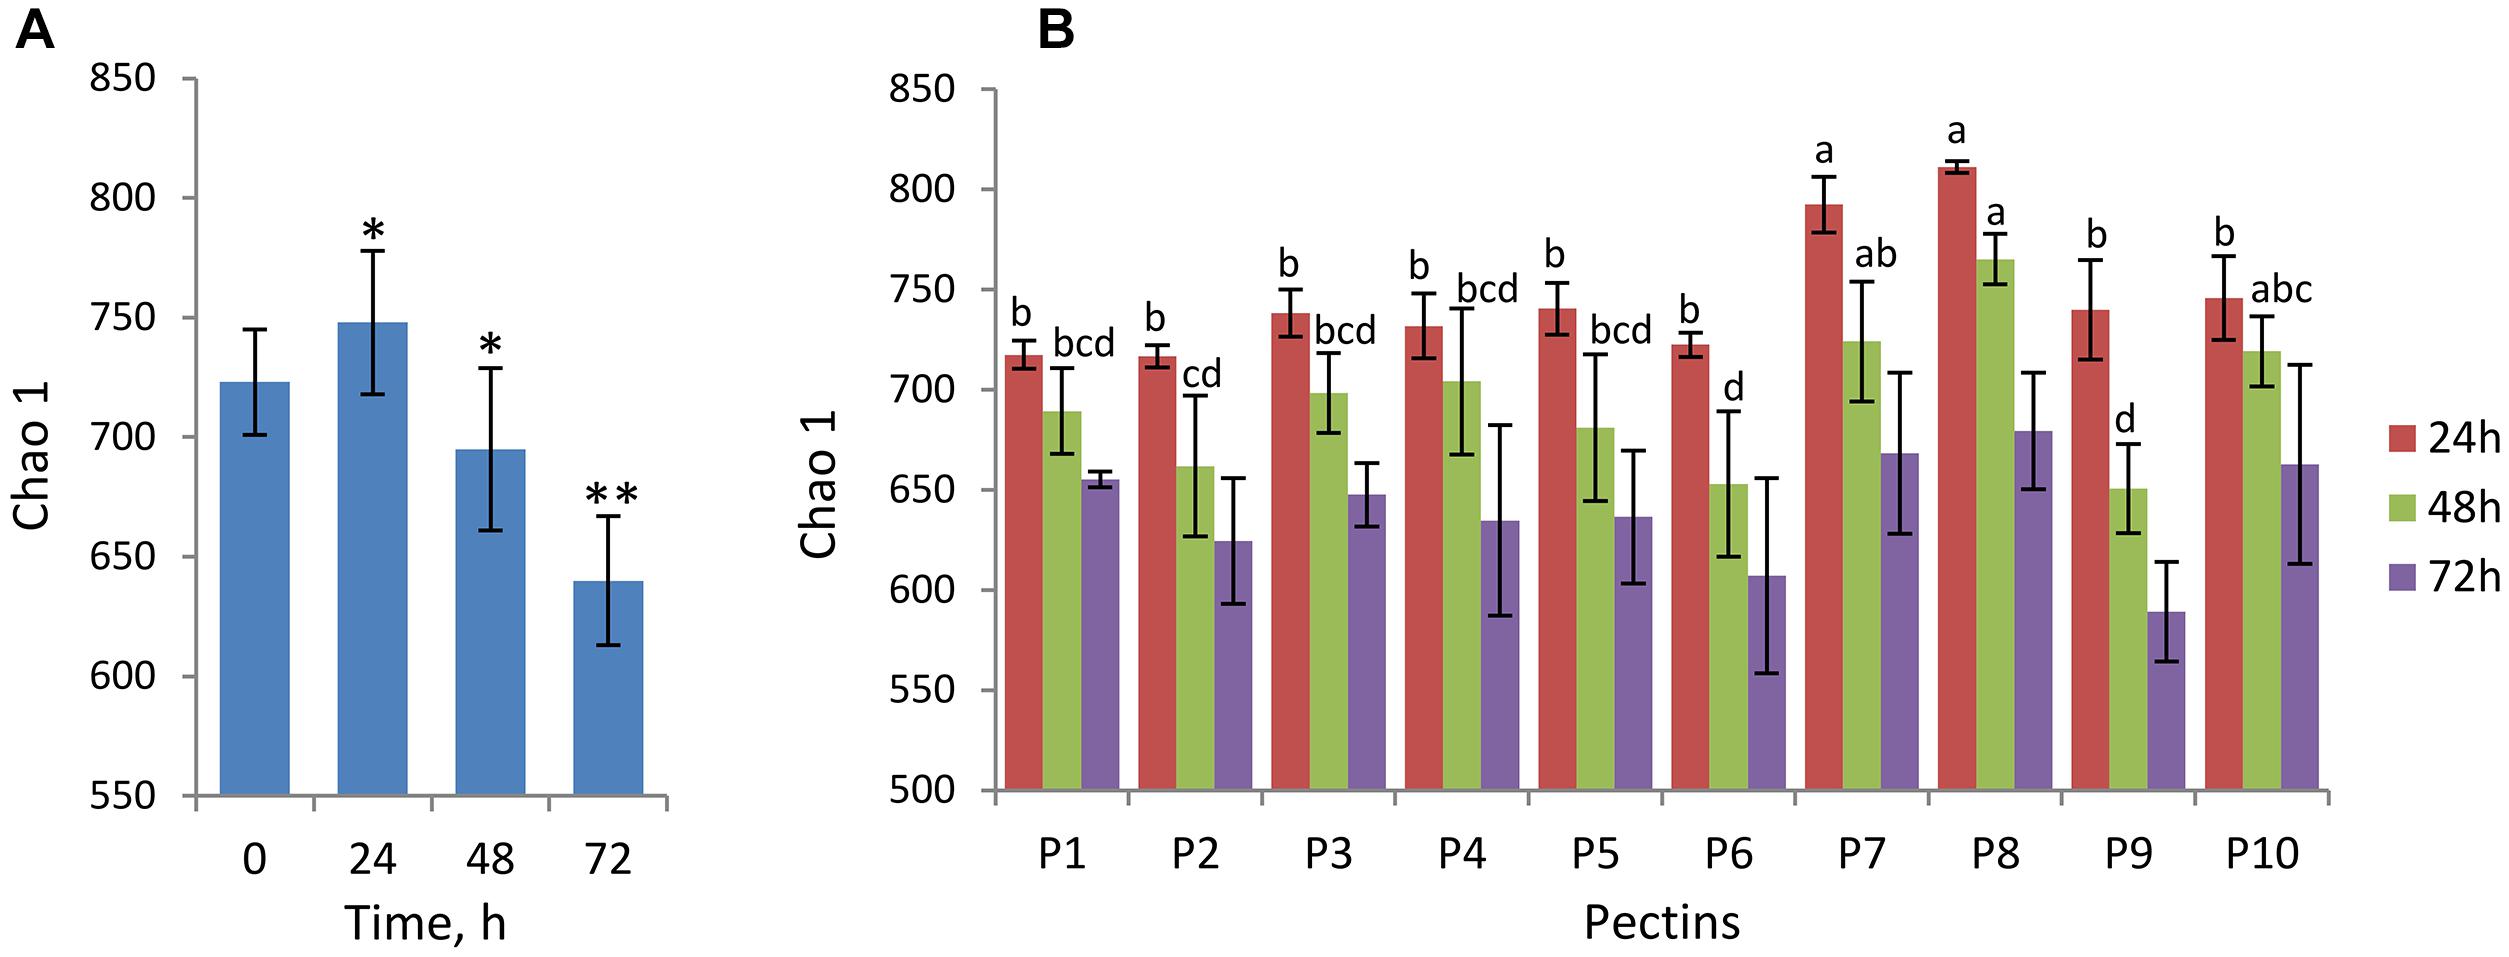 Frontiers  Potential of Pectins to Beneficially Modulate the Gut  Microbiota Depends on Their Structural Properties